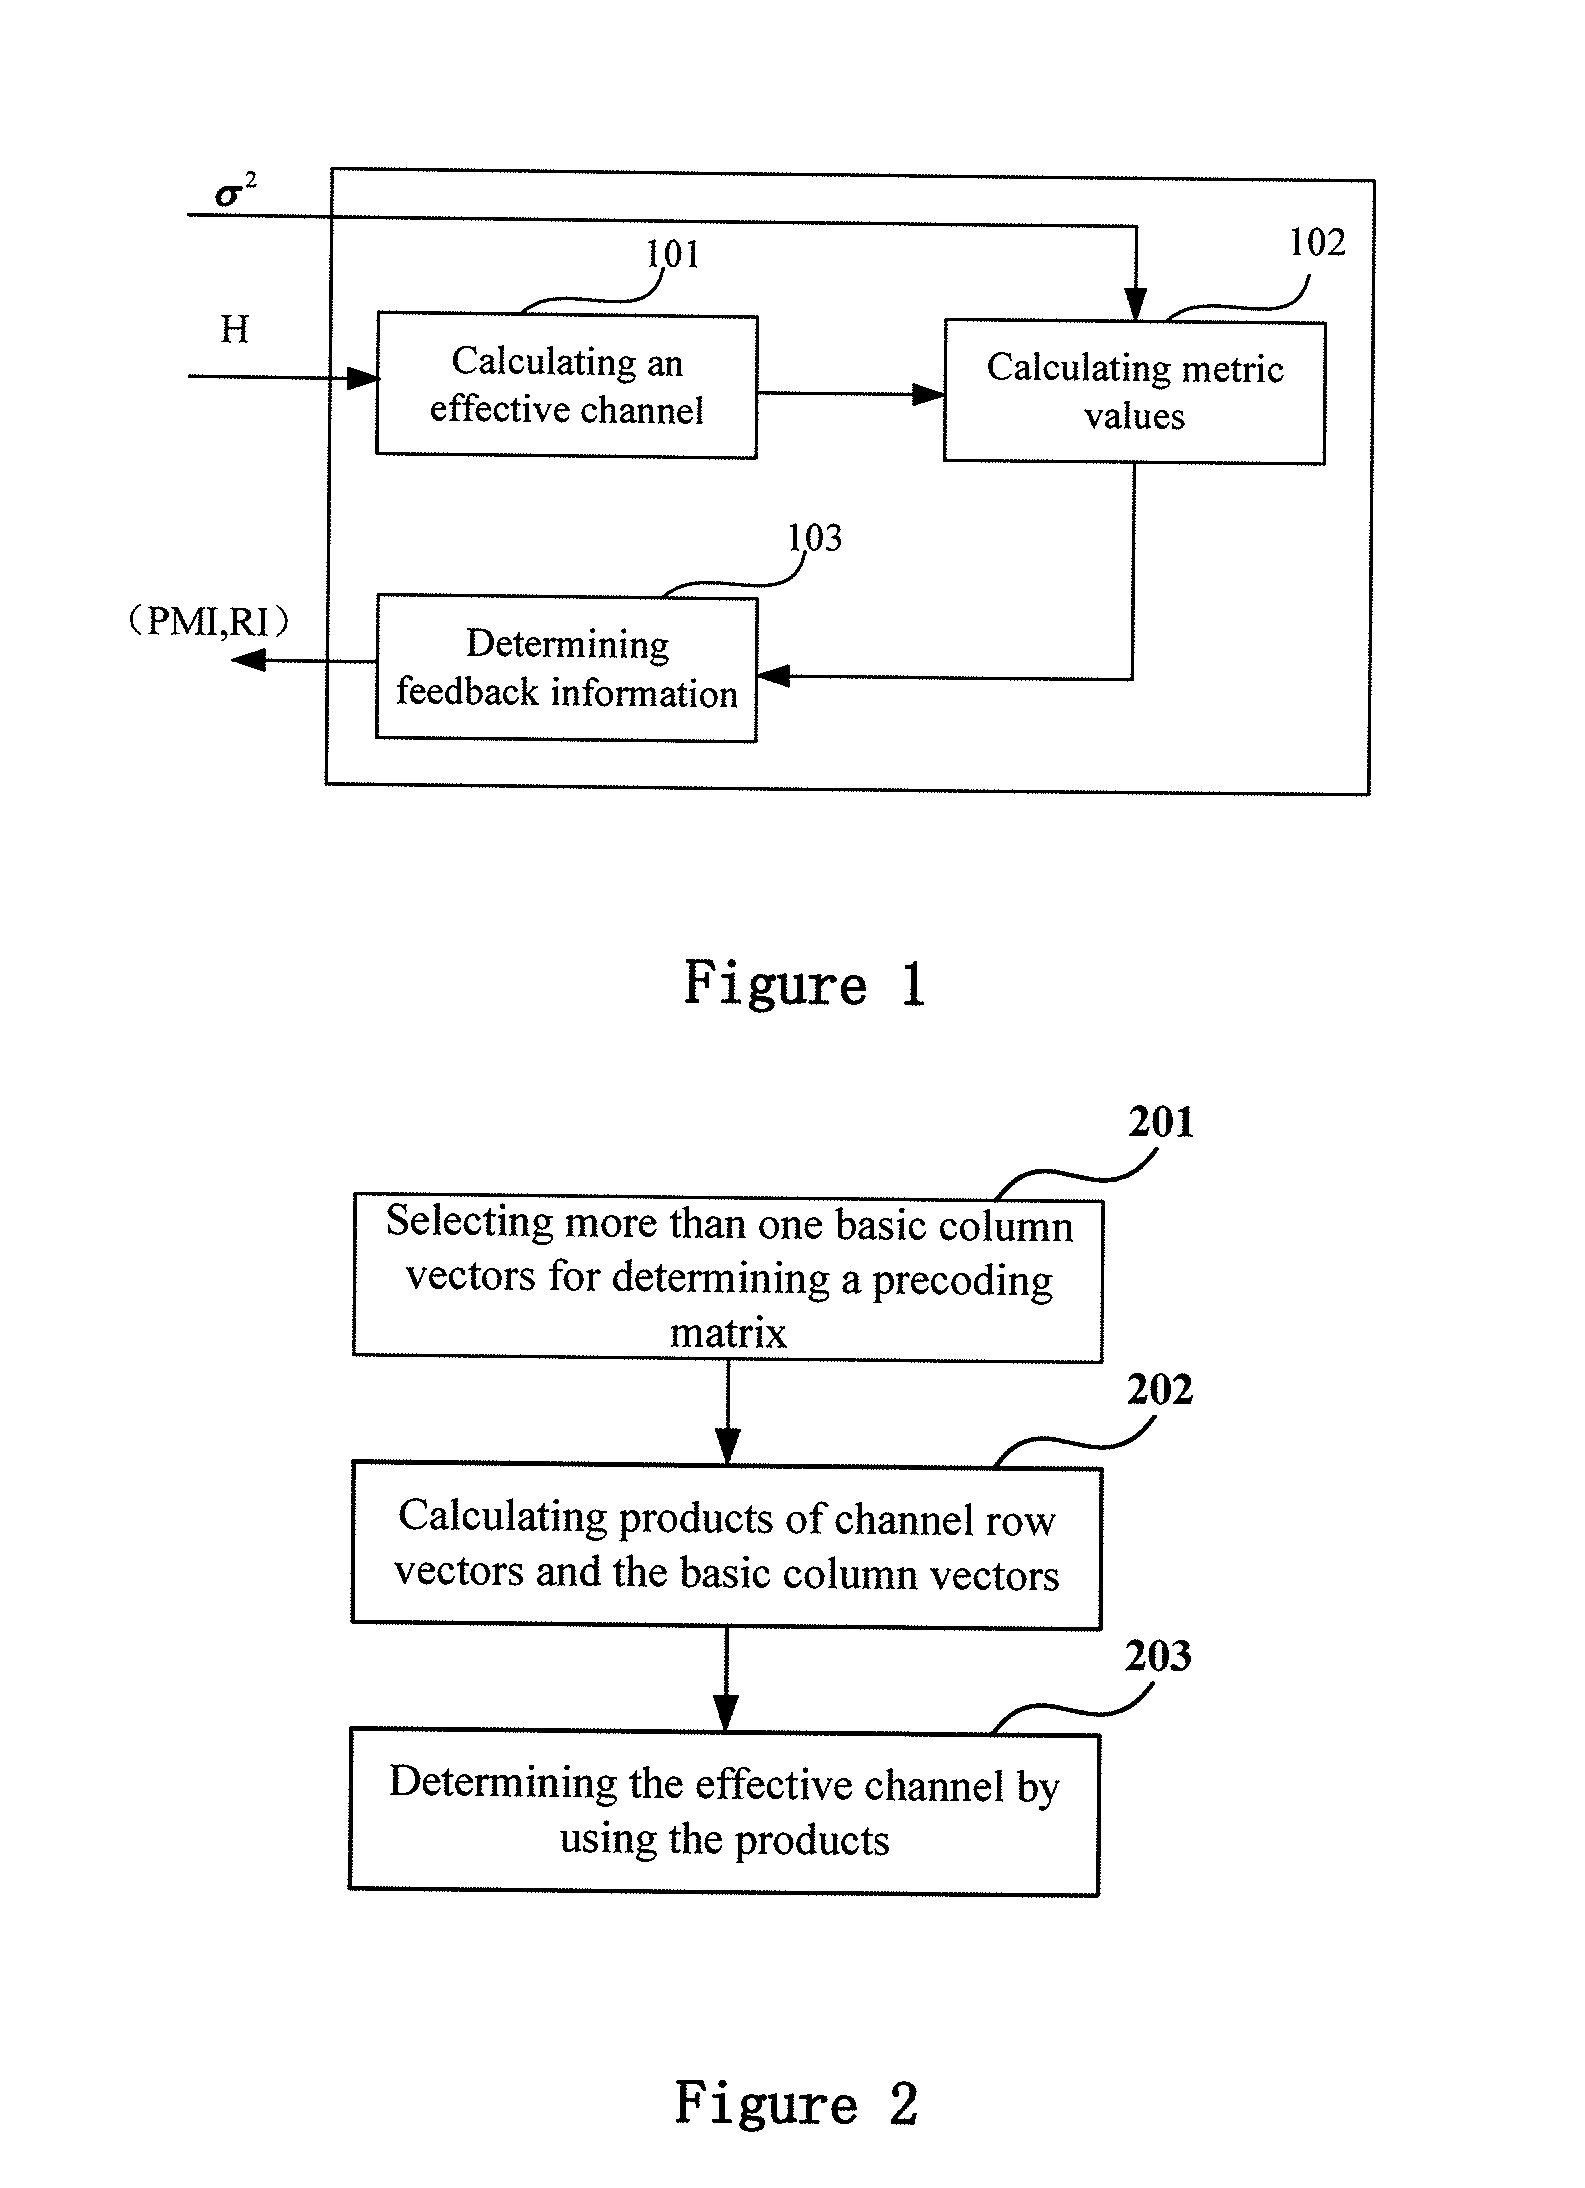 Apparatus and method for determining an effective channel and feedback information